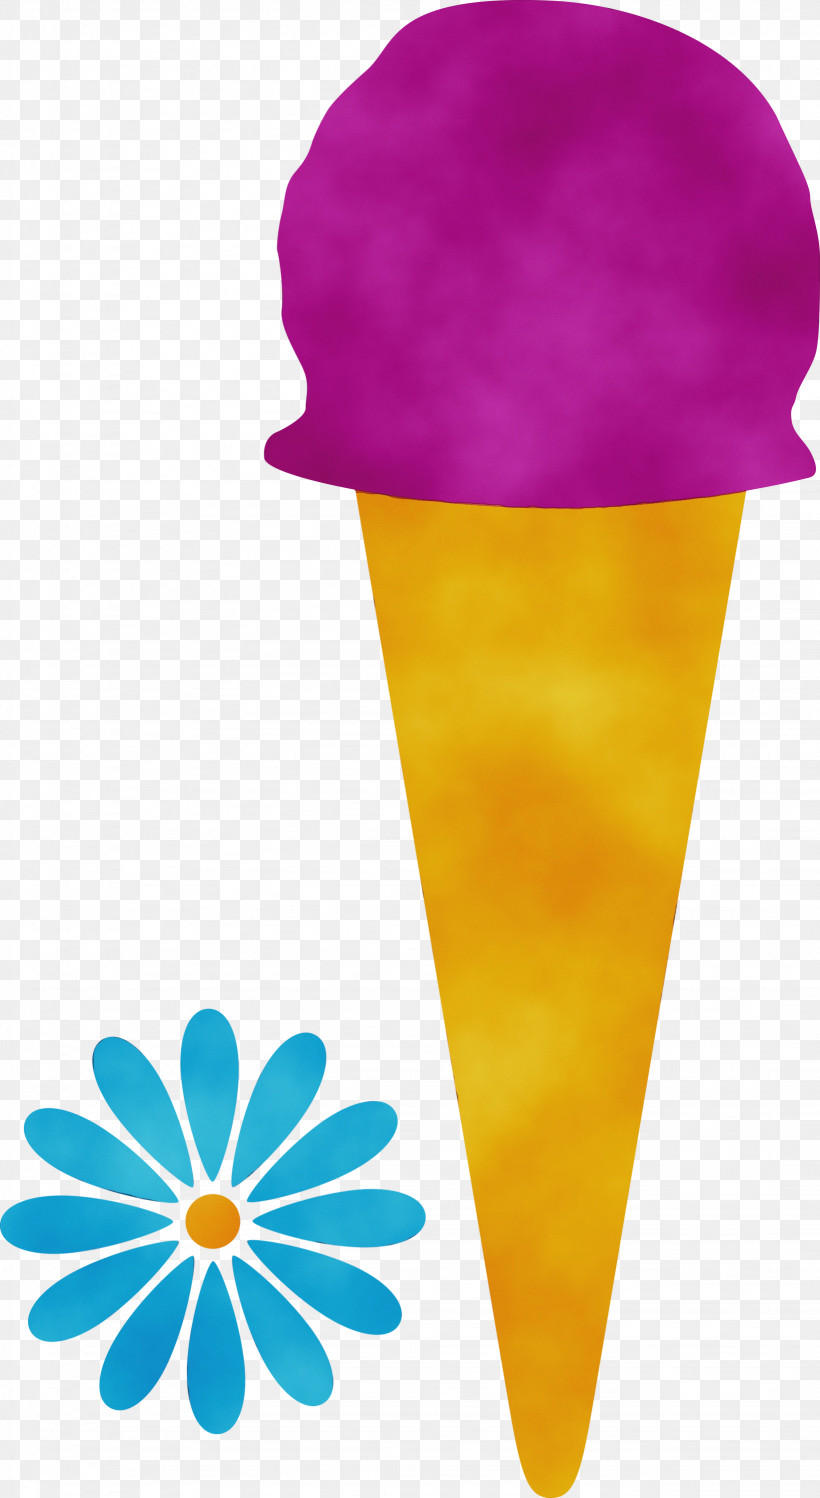 Royalty-free Logo, PNG, 1641x2999px, Ice Cream, Logo, Paint, Royaltyfree, Watercolor Download Free